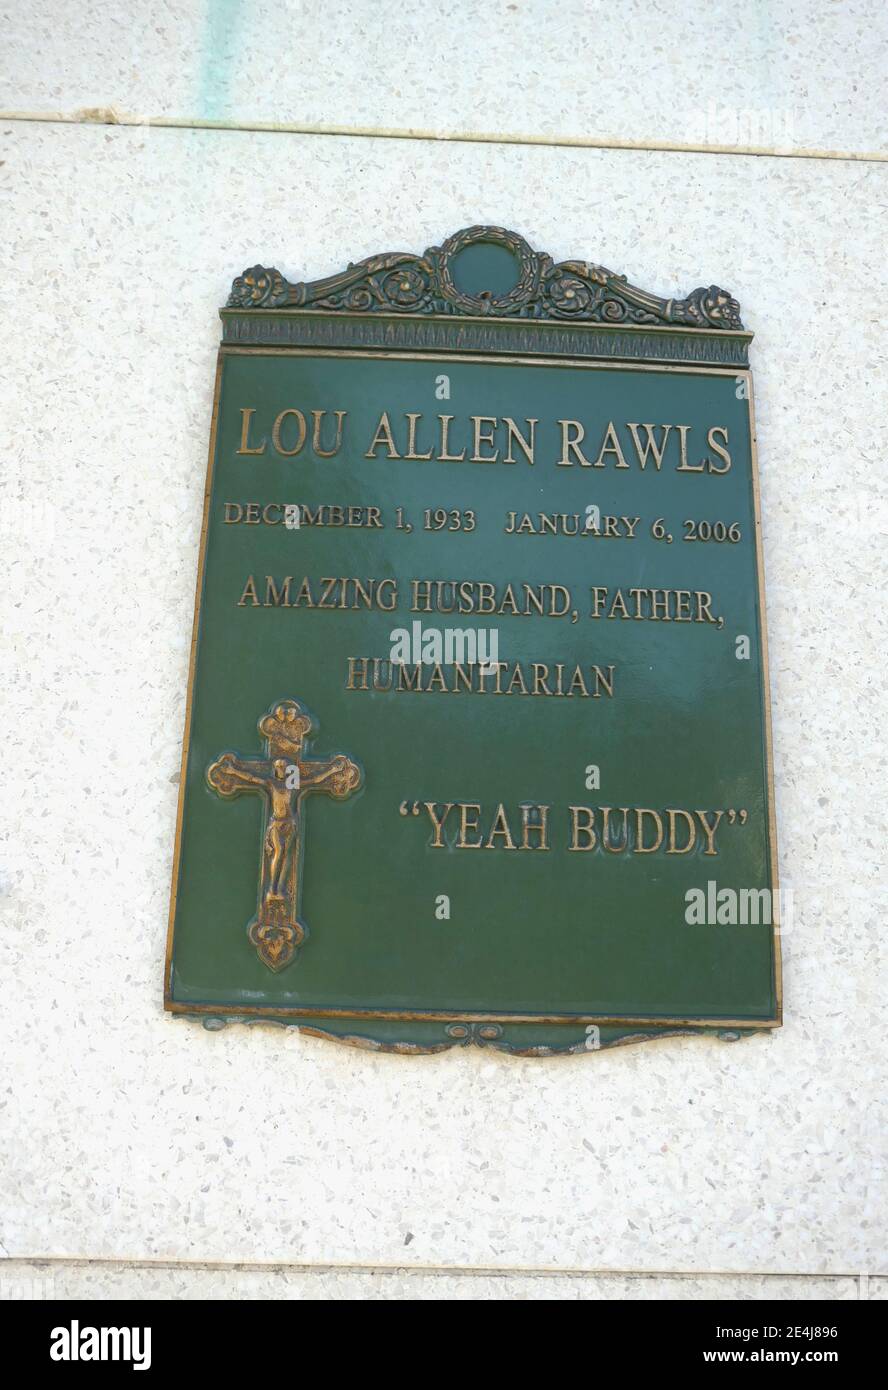 Los Angeles, California, USA 21st January 2021 A general view of atmosphere of Singer Lou Rawls Grave at Forest Lawn Memorial Park Hollywood Hills on January 21, 2021 in Los Angeles, California, USA. Photo by Barry King/Alamy Stock Photo Stock Photo